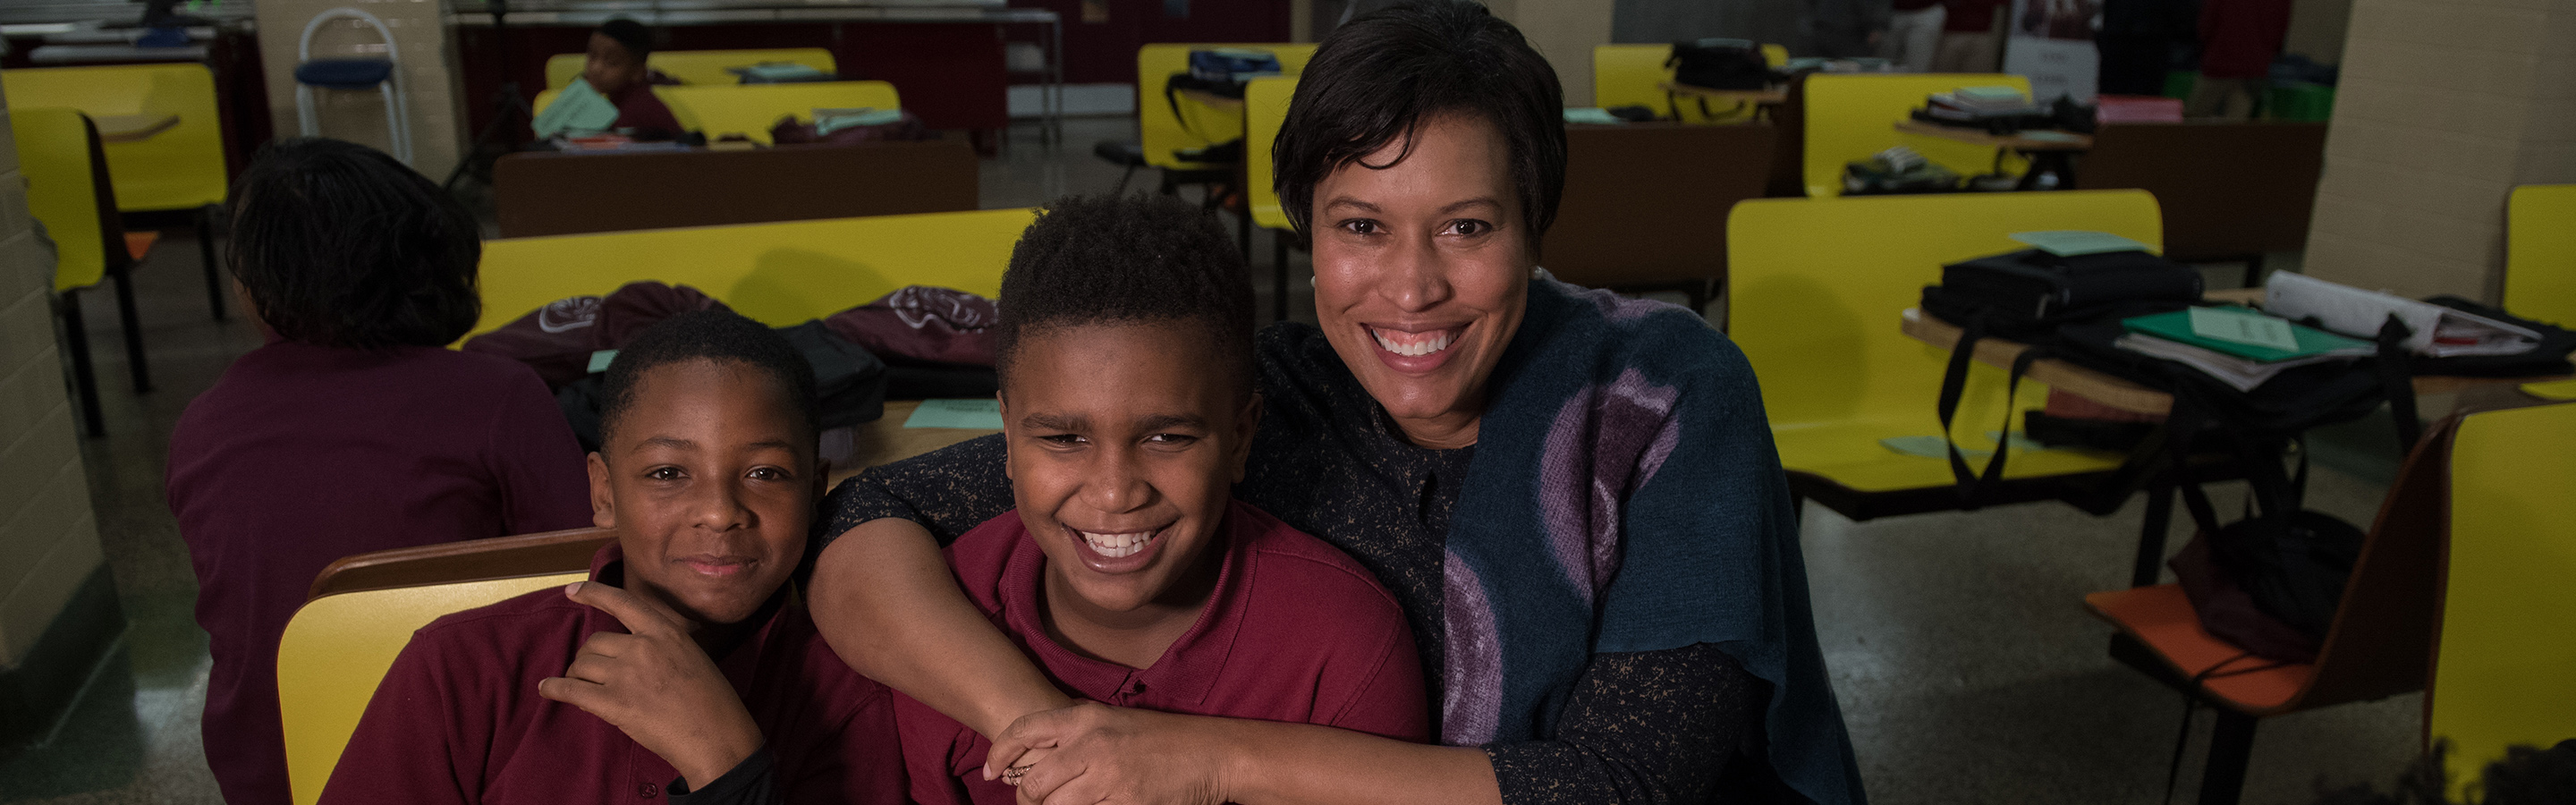 Mayor Bowser hugging kids in their classroom